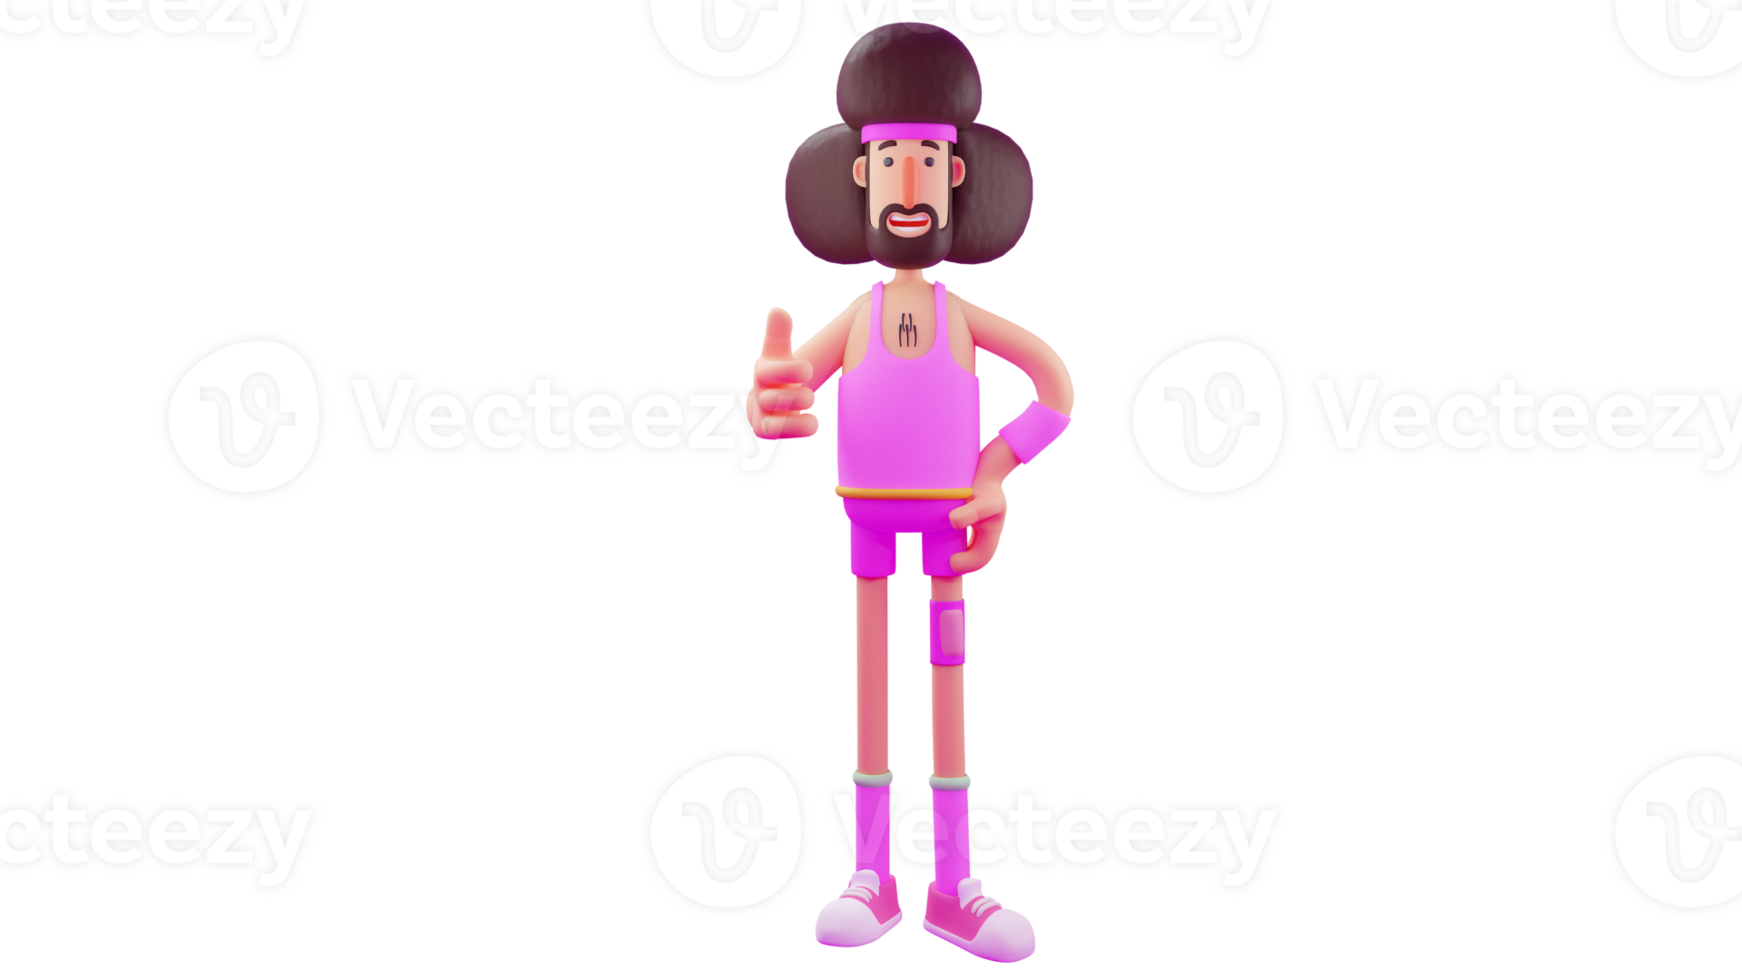 3D illustration. Athlete 3D cartoon character. The male athlete has fluffy curly hair. Athletes wear pink clothes. Athlete smiles sweetly and gives a thumbs up sign. 3D cartoon character png